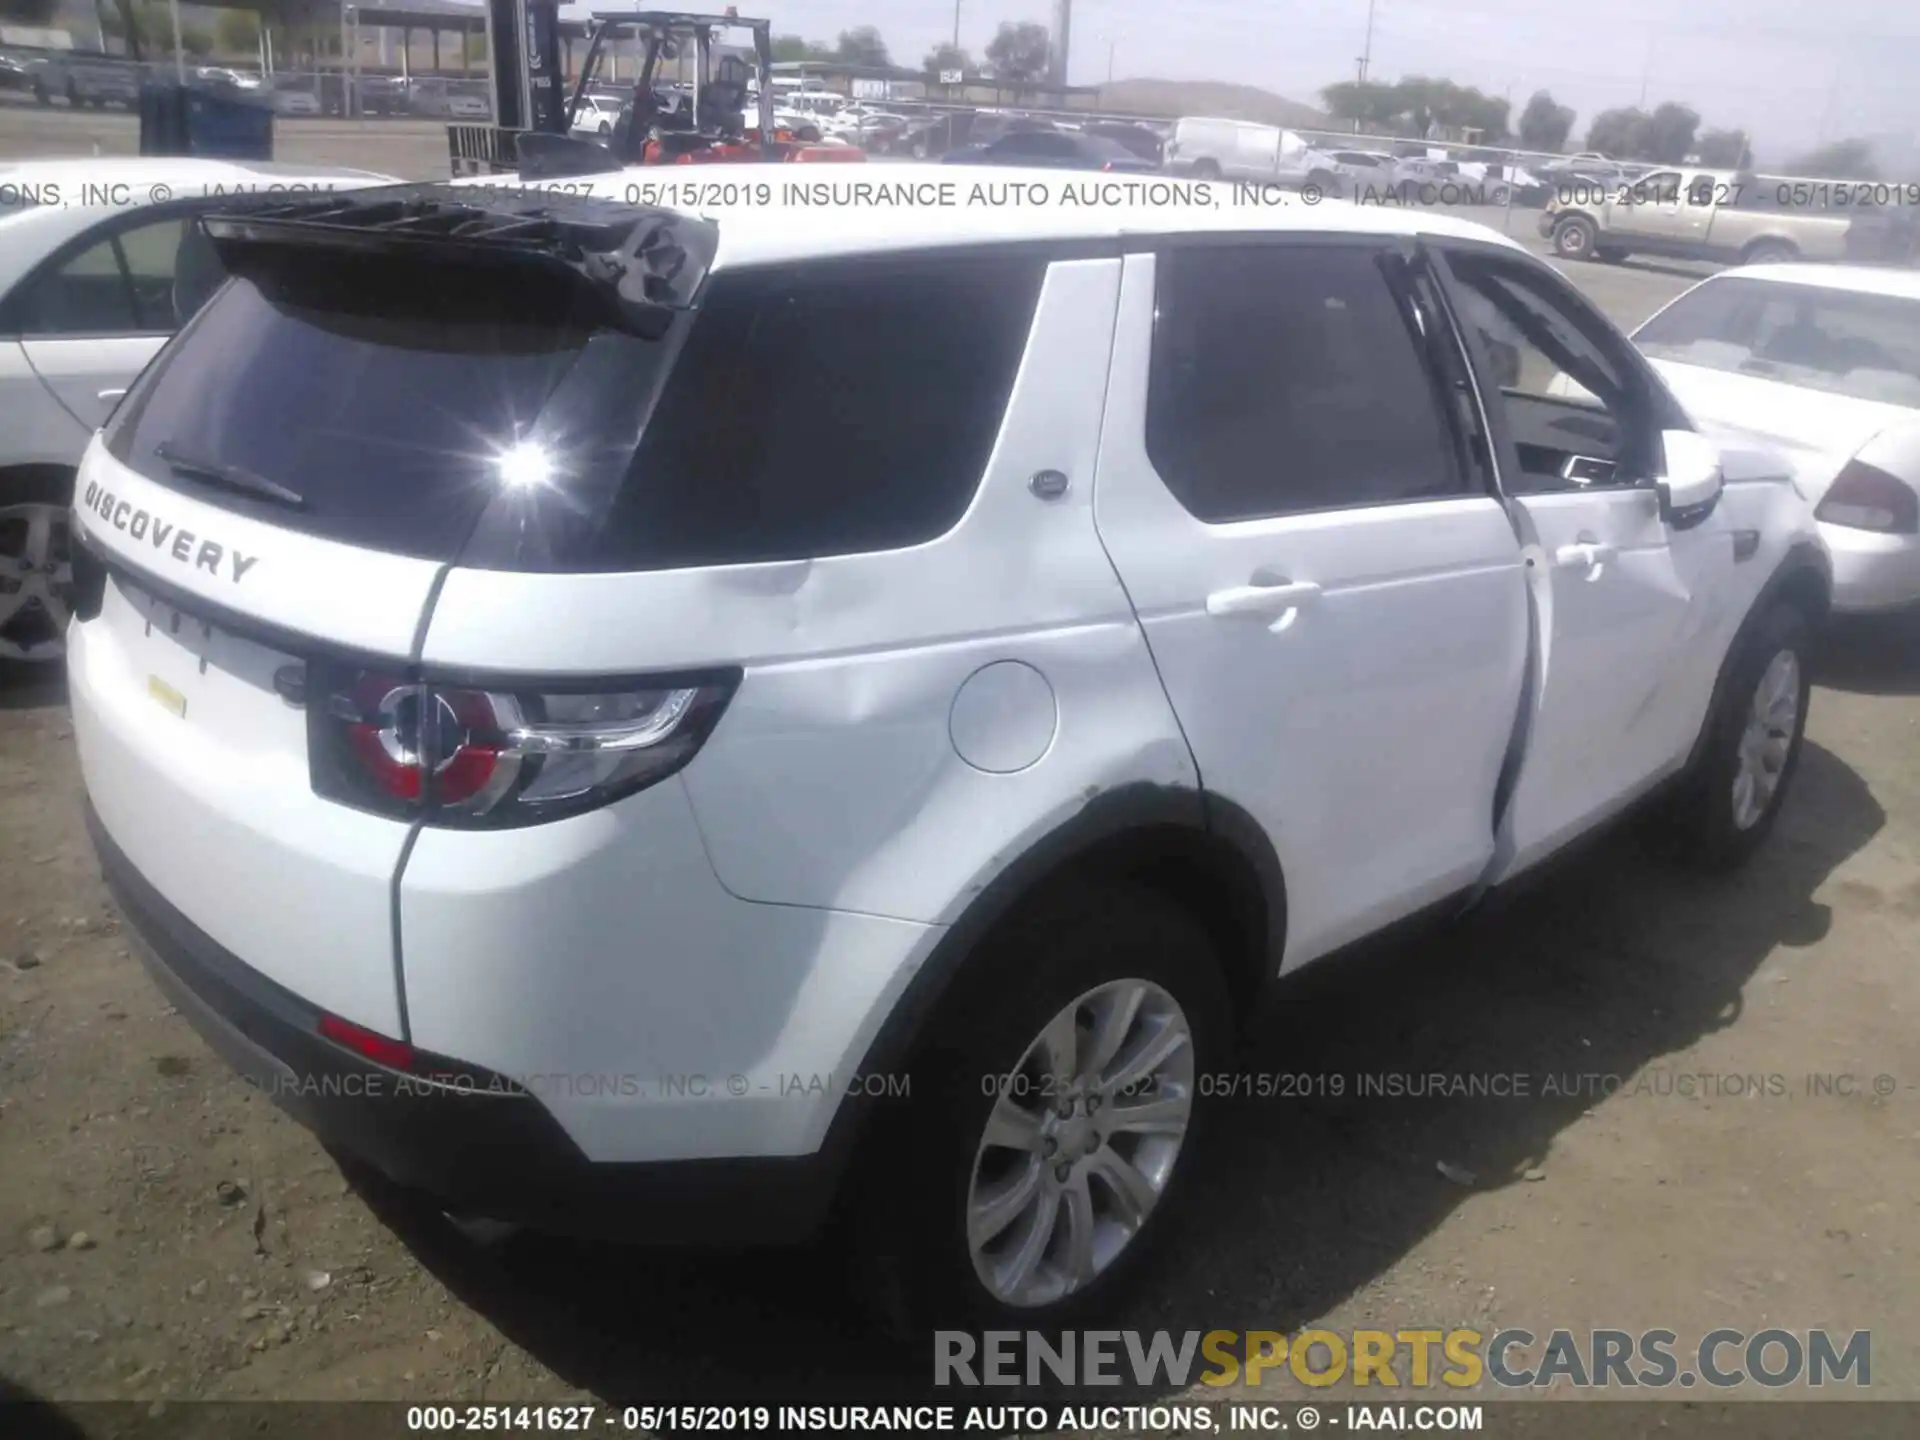 4 Photograph of a damaged car SALCP2FXXKH799937 LAND ROVER DISCOVERY SPORT 2019